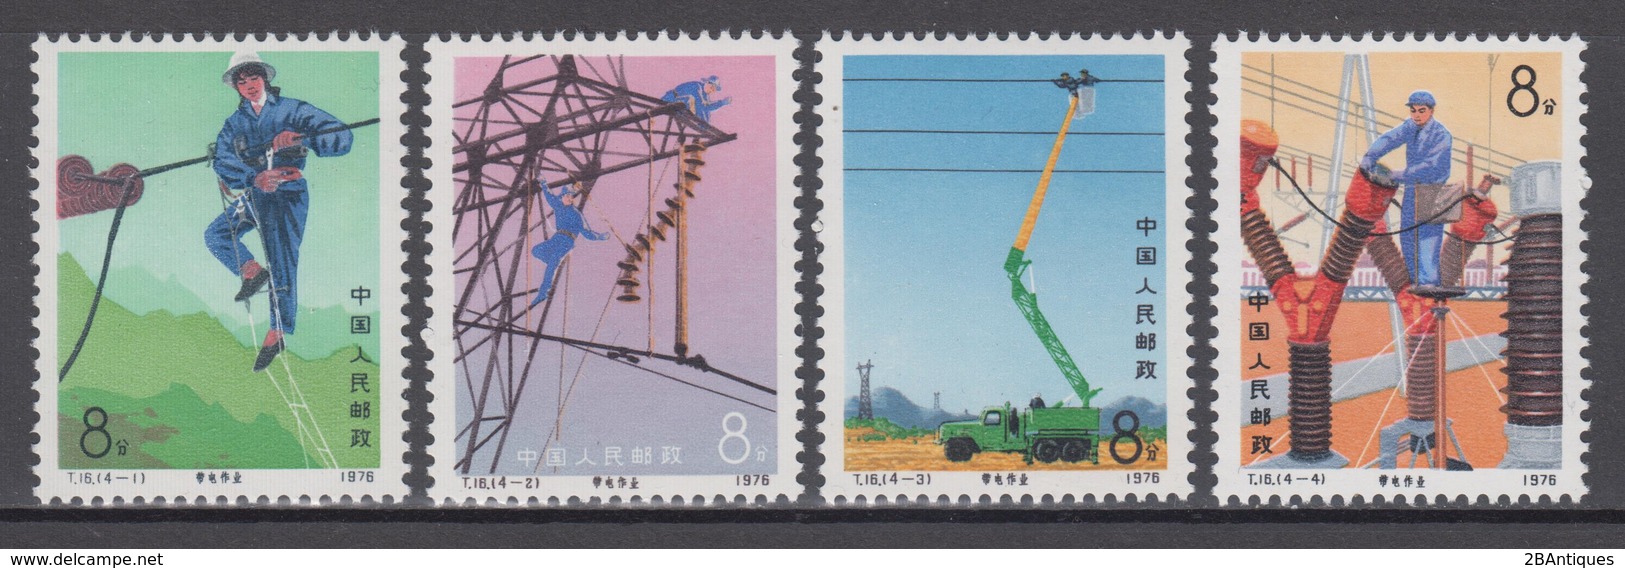 PR CHINA 1976 - Maintenance Of Electric Power Lines MNH** OG XF - Unused Stamps